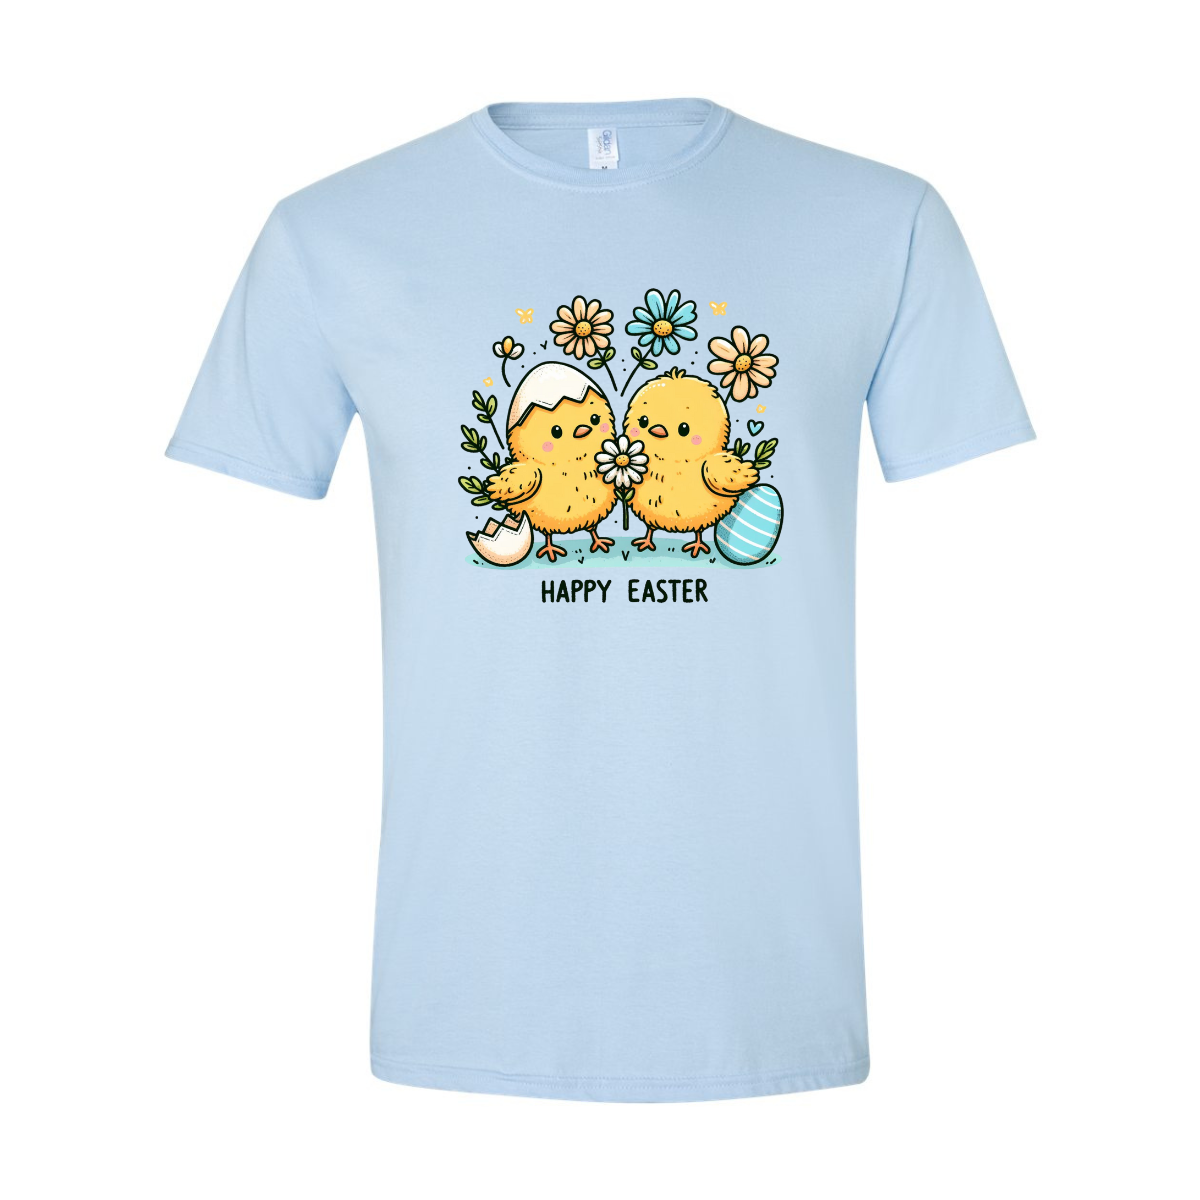 ADULT Unisex T-Shirt EASB020 HAPPY EASTER 4